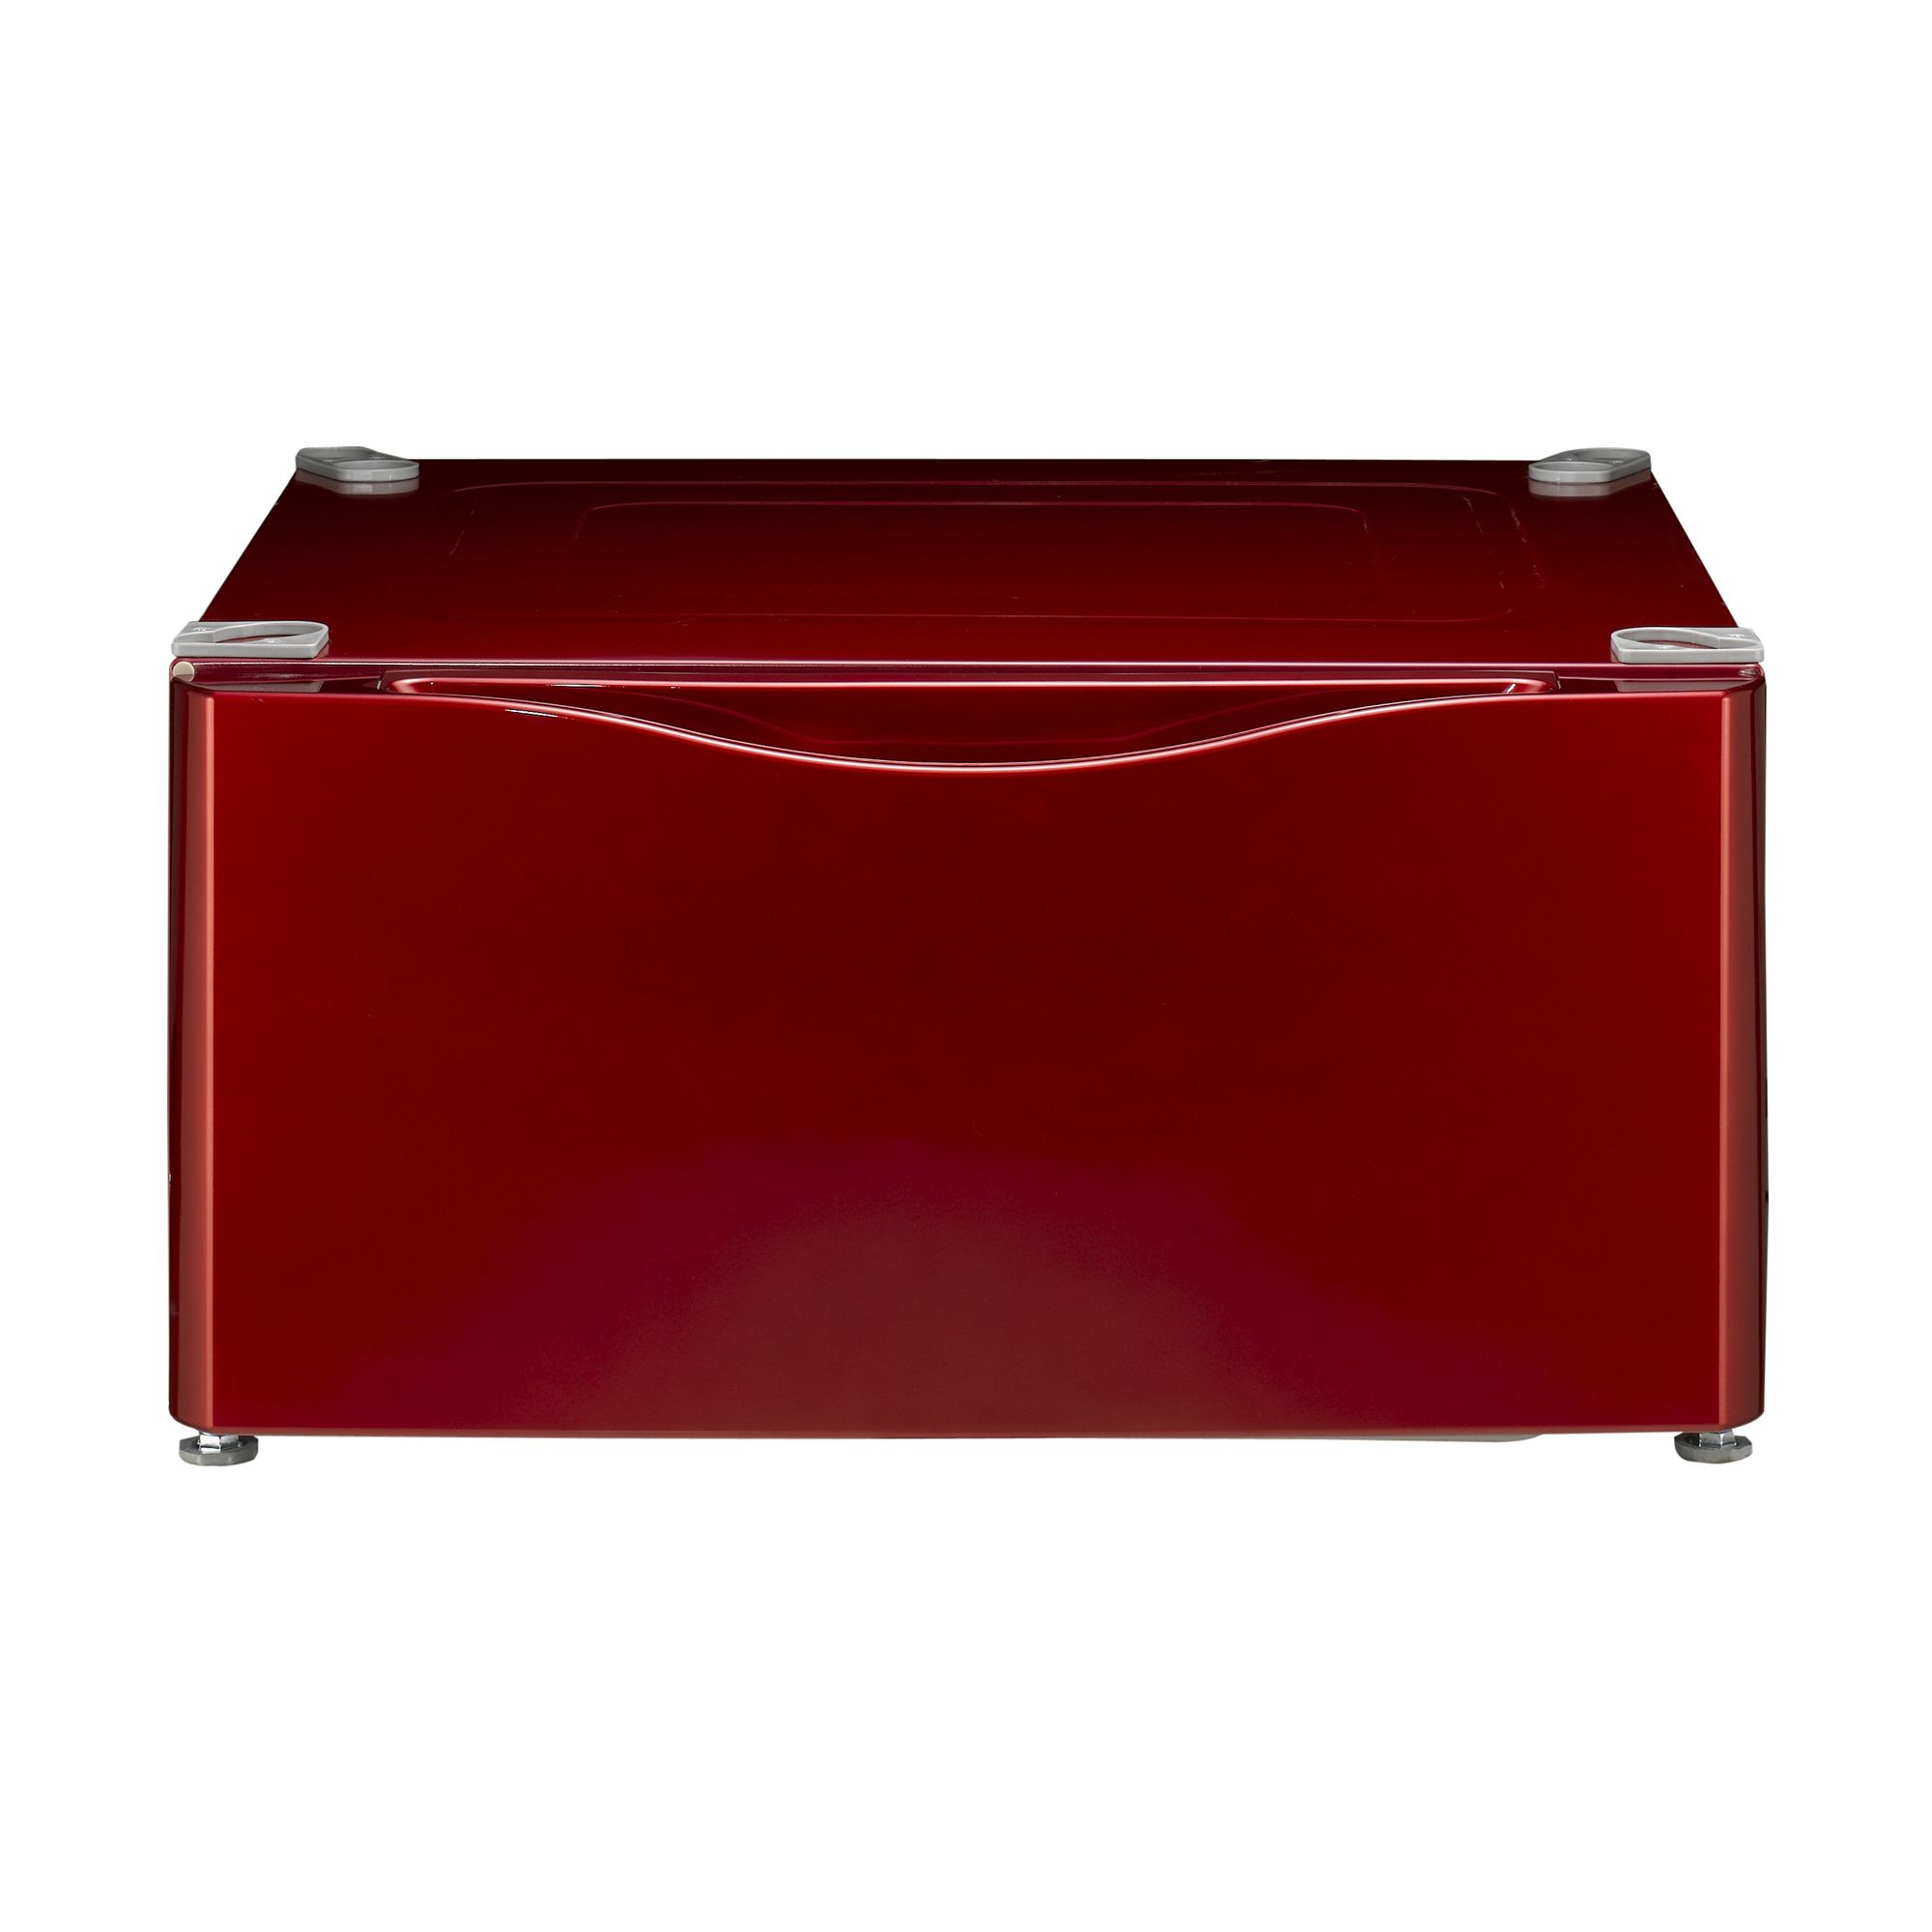 Kenmore 13.7 in. Laundry Pedestal w/ Storage Drawer Red